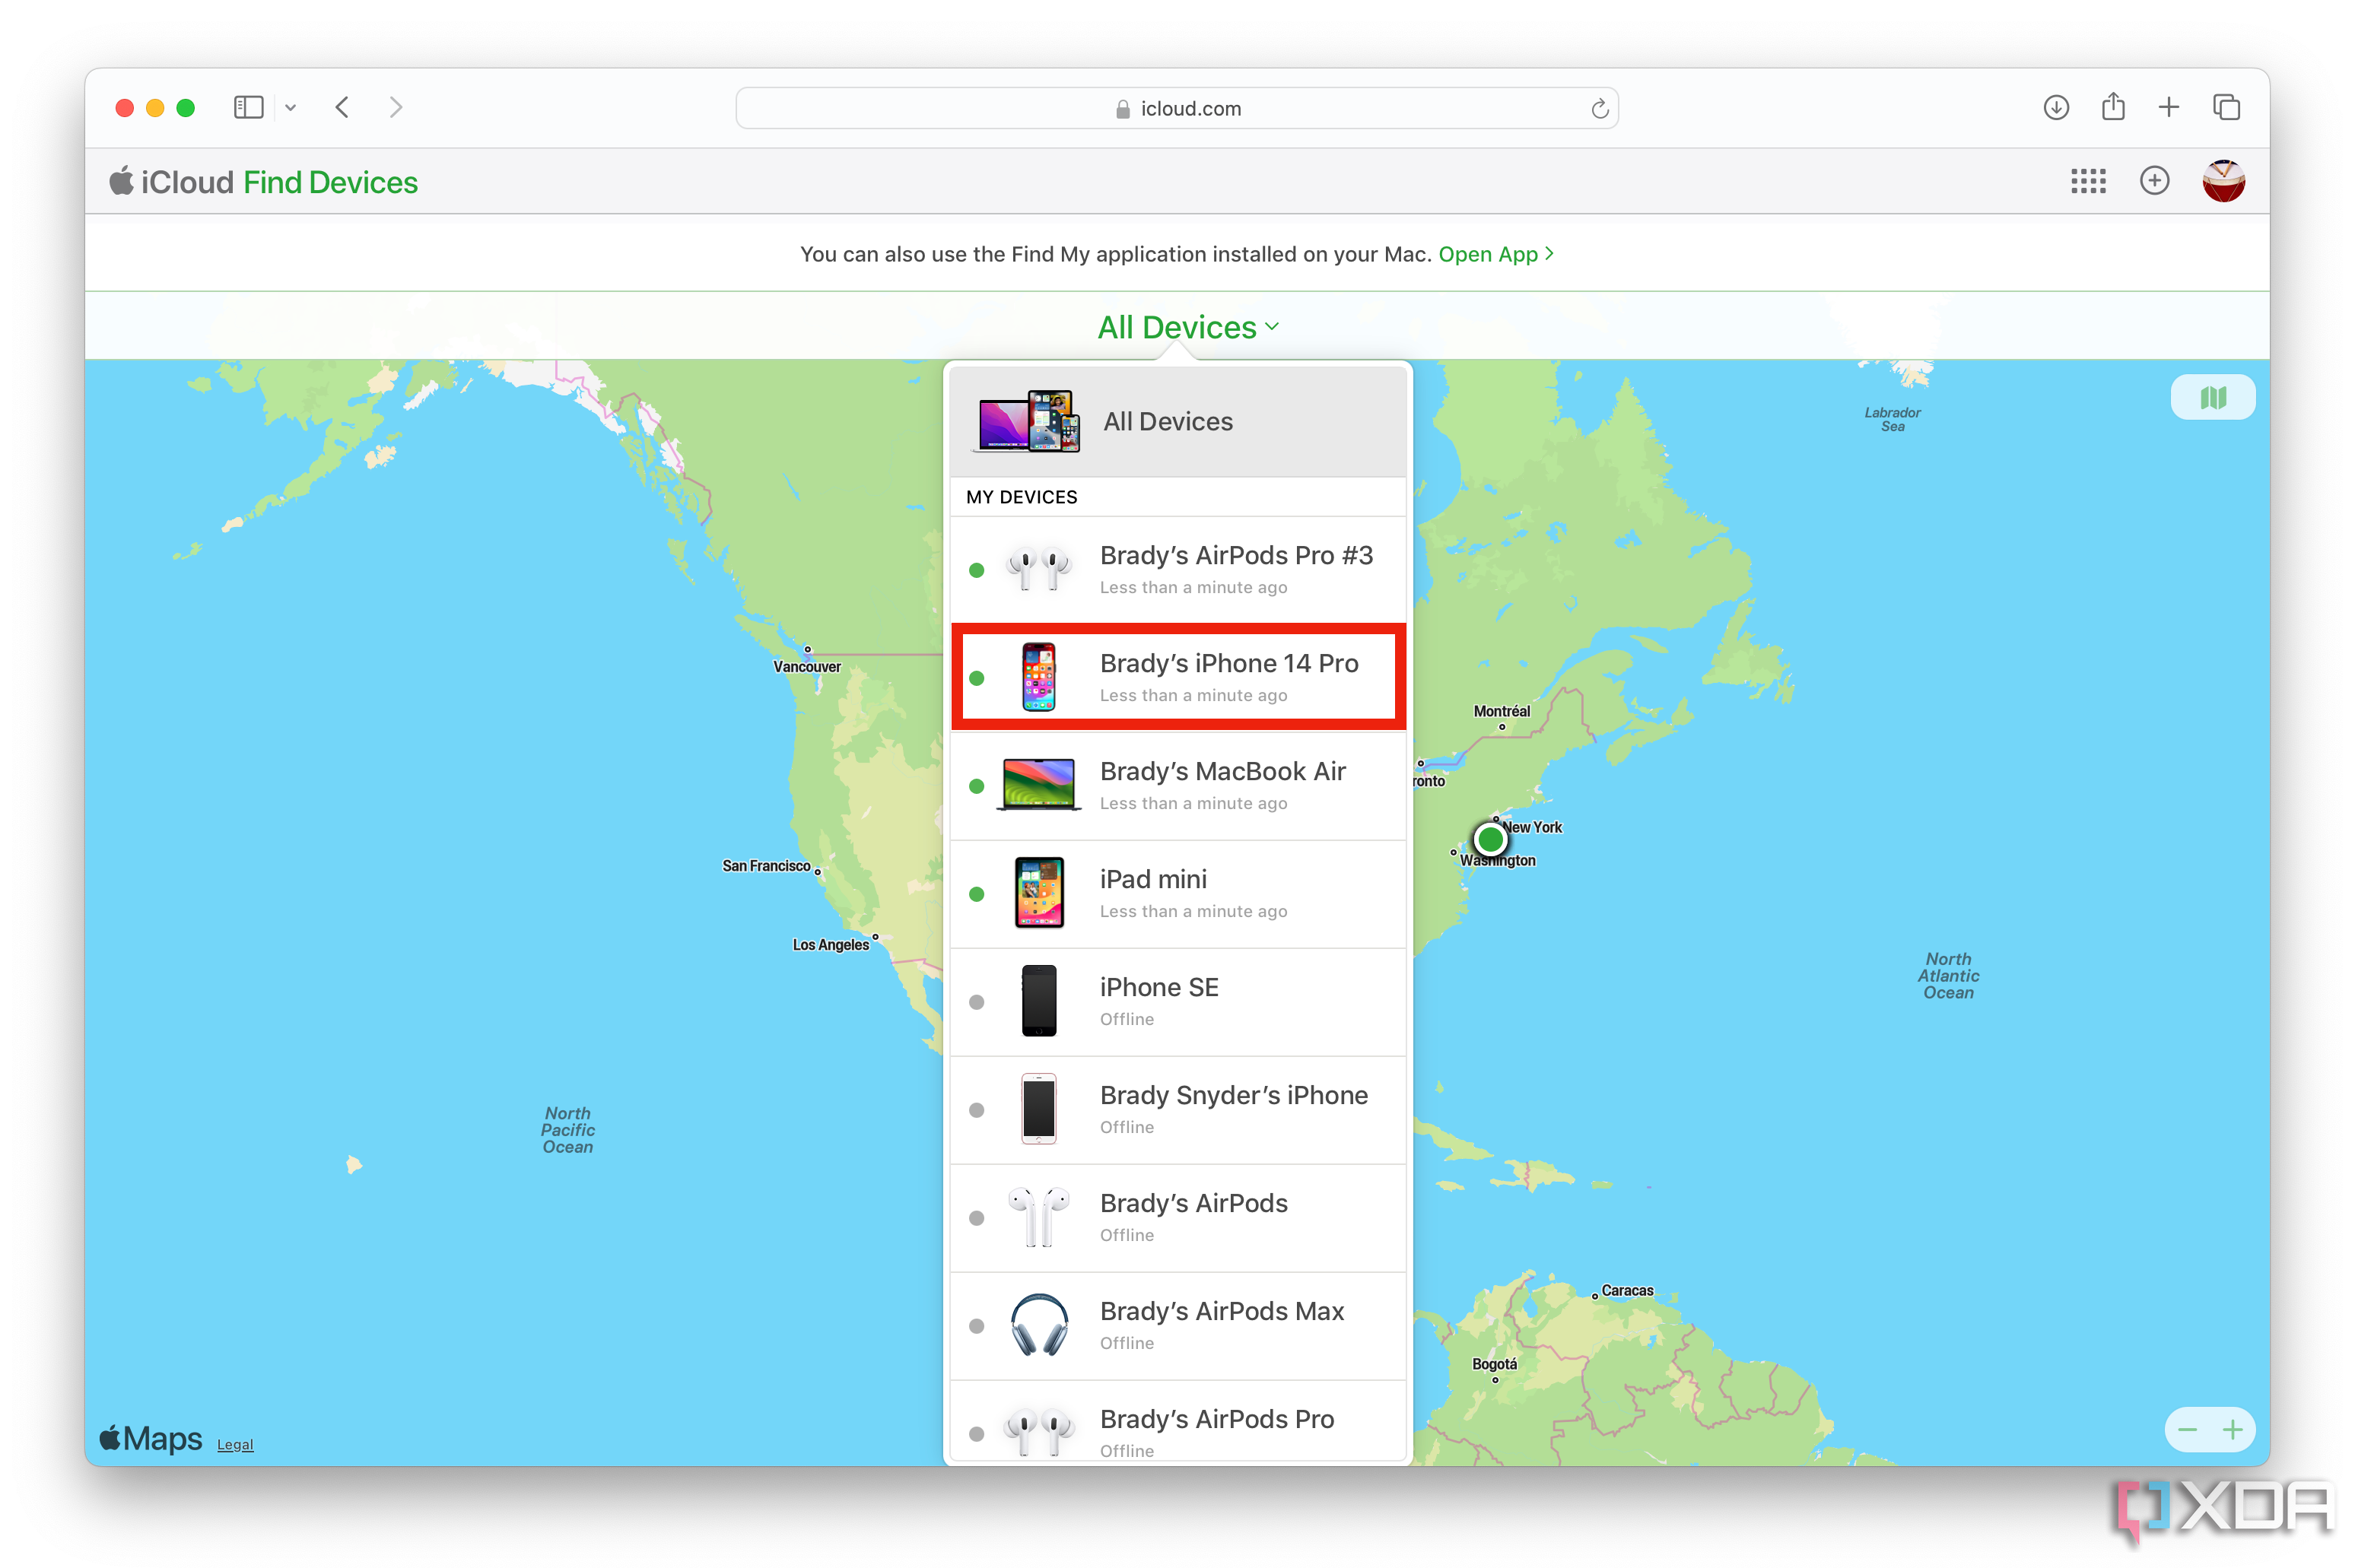 The Find My device list in iCloud for web.